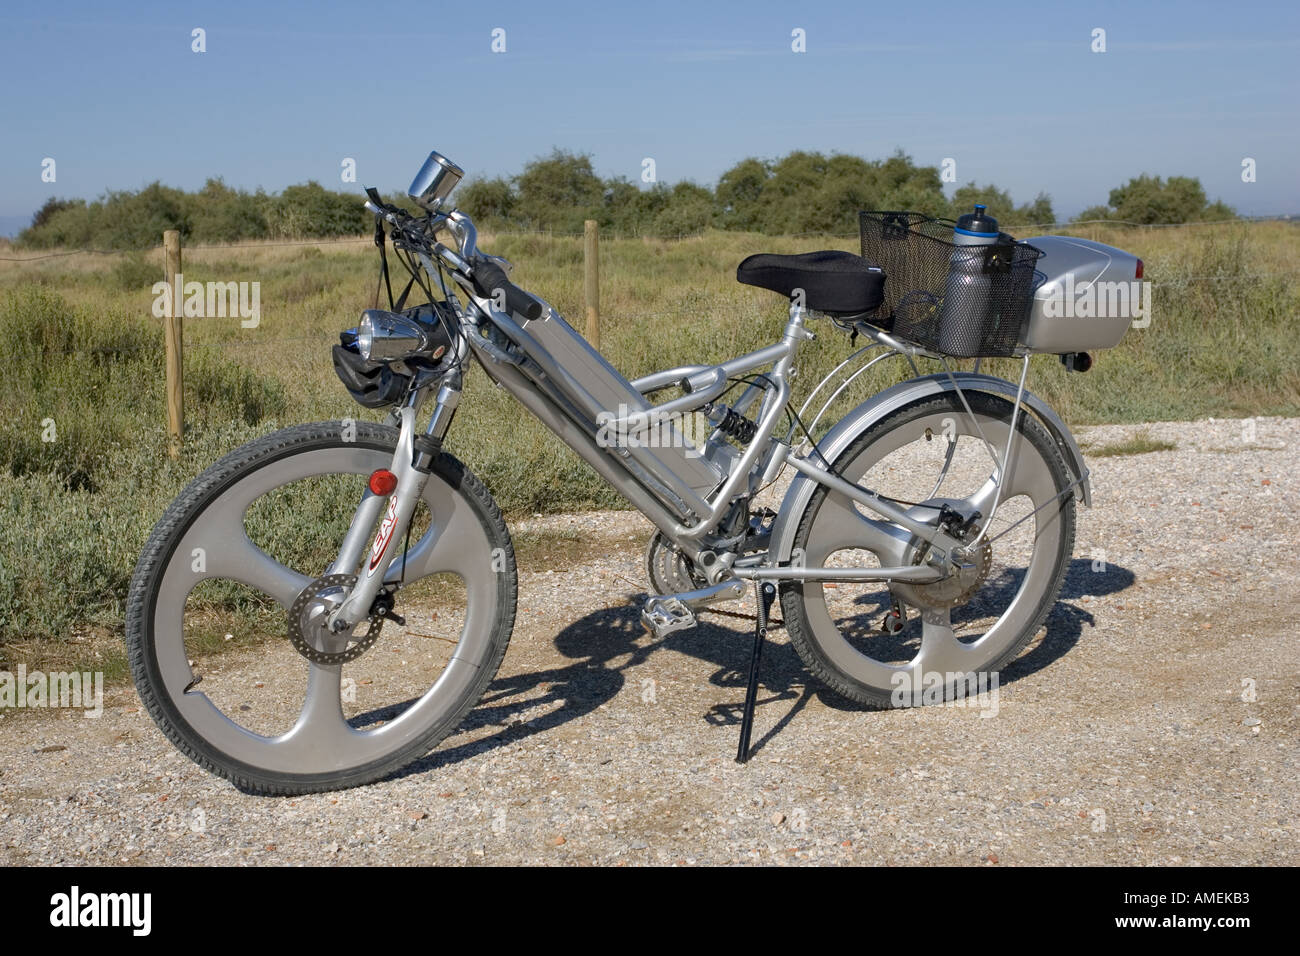 Modern electric bicycle with strong lightweight frame solid wheels disk brakes and special luggage carriers France Stock Photo